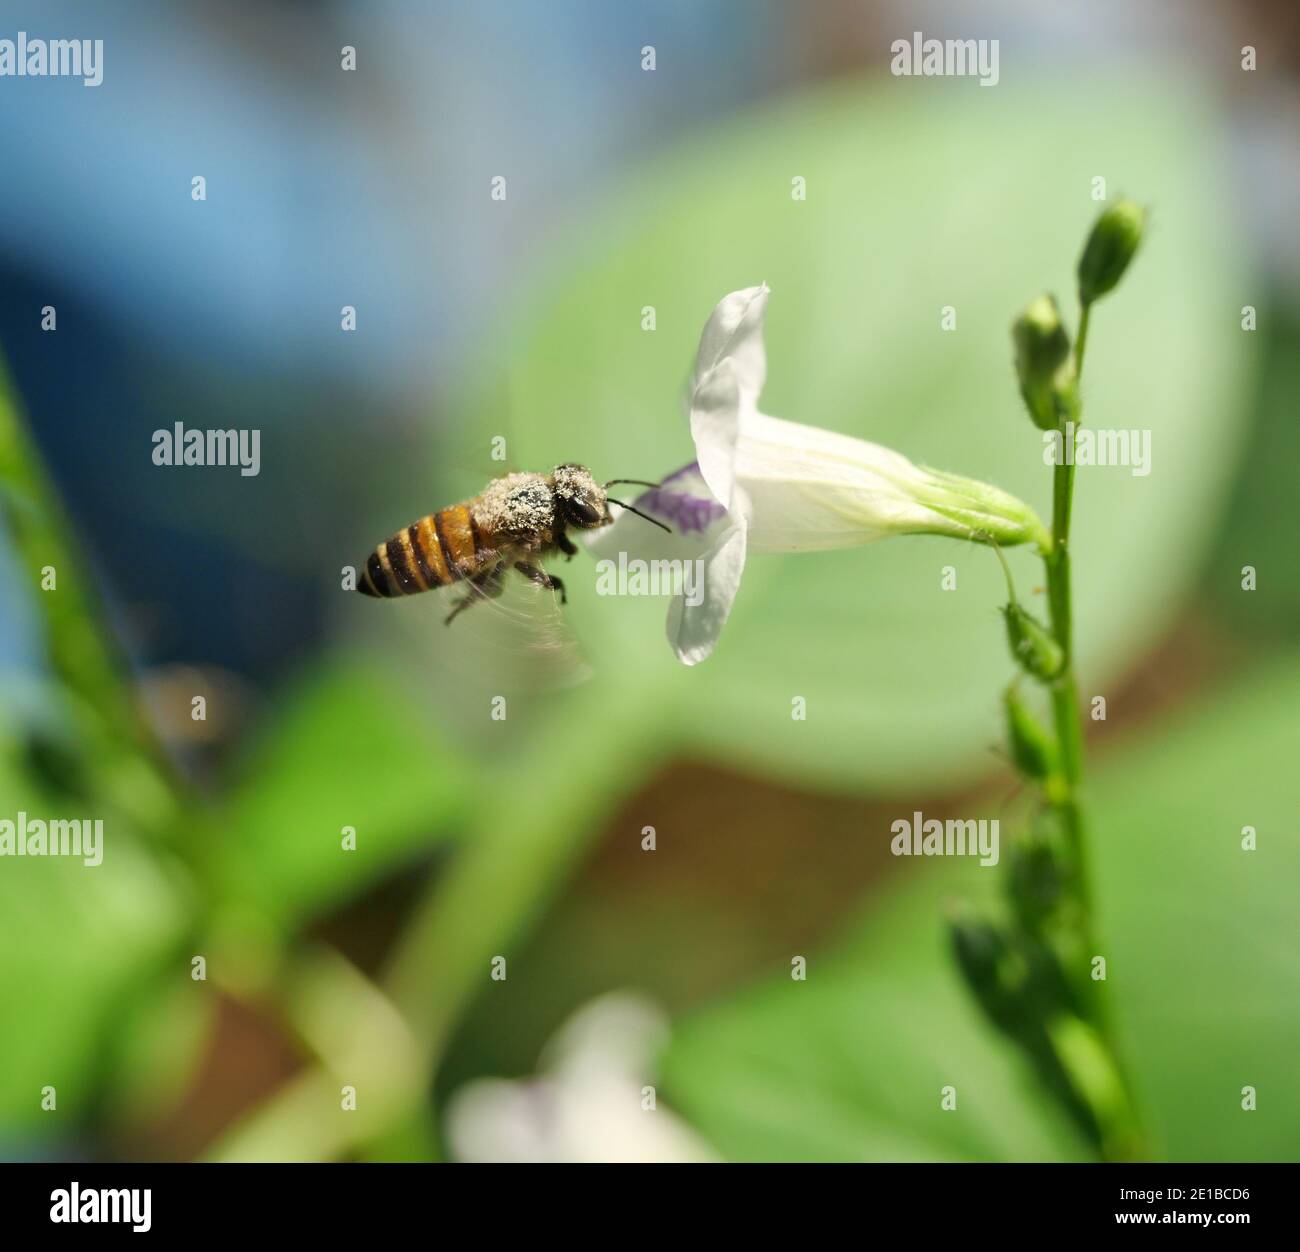 Honey Bee seeking nectar on white Chinese violet or coromandel or creeping foxglove ( Asystasia gangetica ) blossom in field with natural green Stock Photo